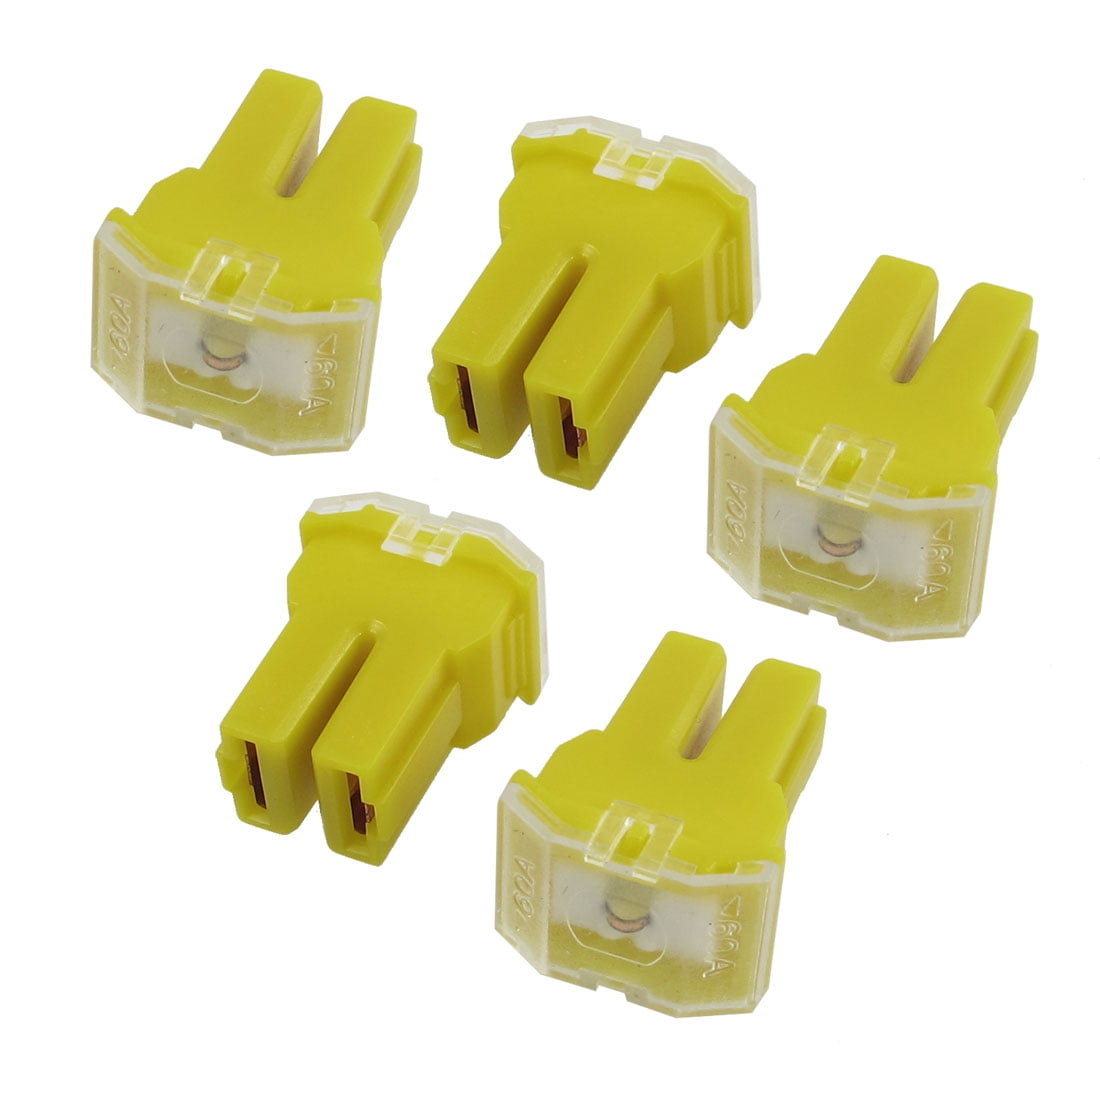 5 x 60A Yellow PAL Pacific Type 2 Blade Slow Blow Fuse for Car 